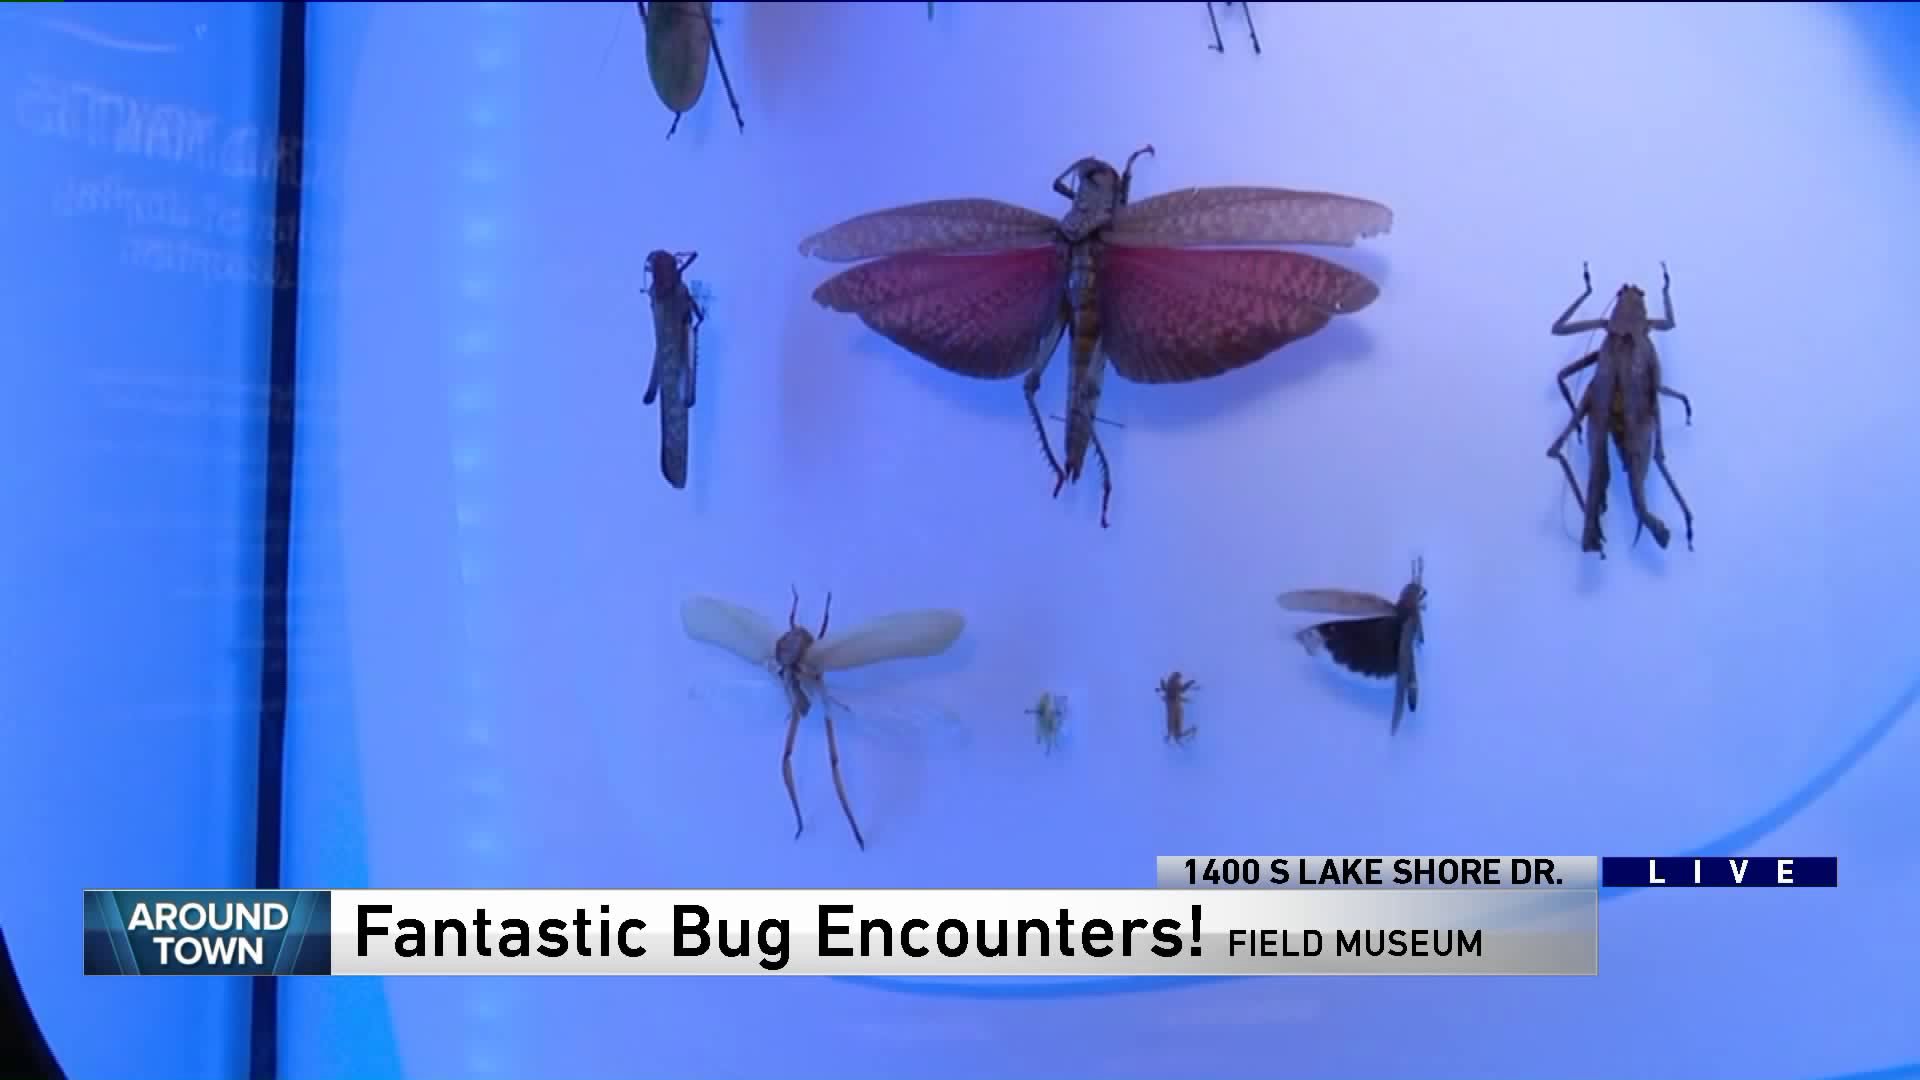 Around Town checks out ‘Fantastic Bug Encounters!’ at the Field Museum